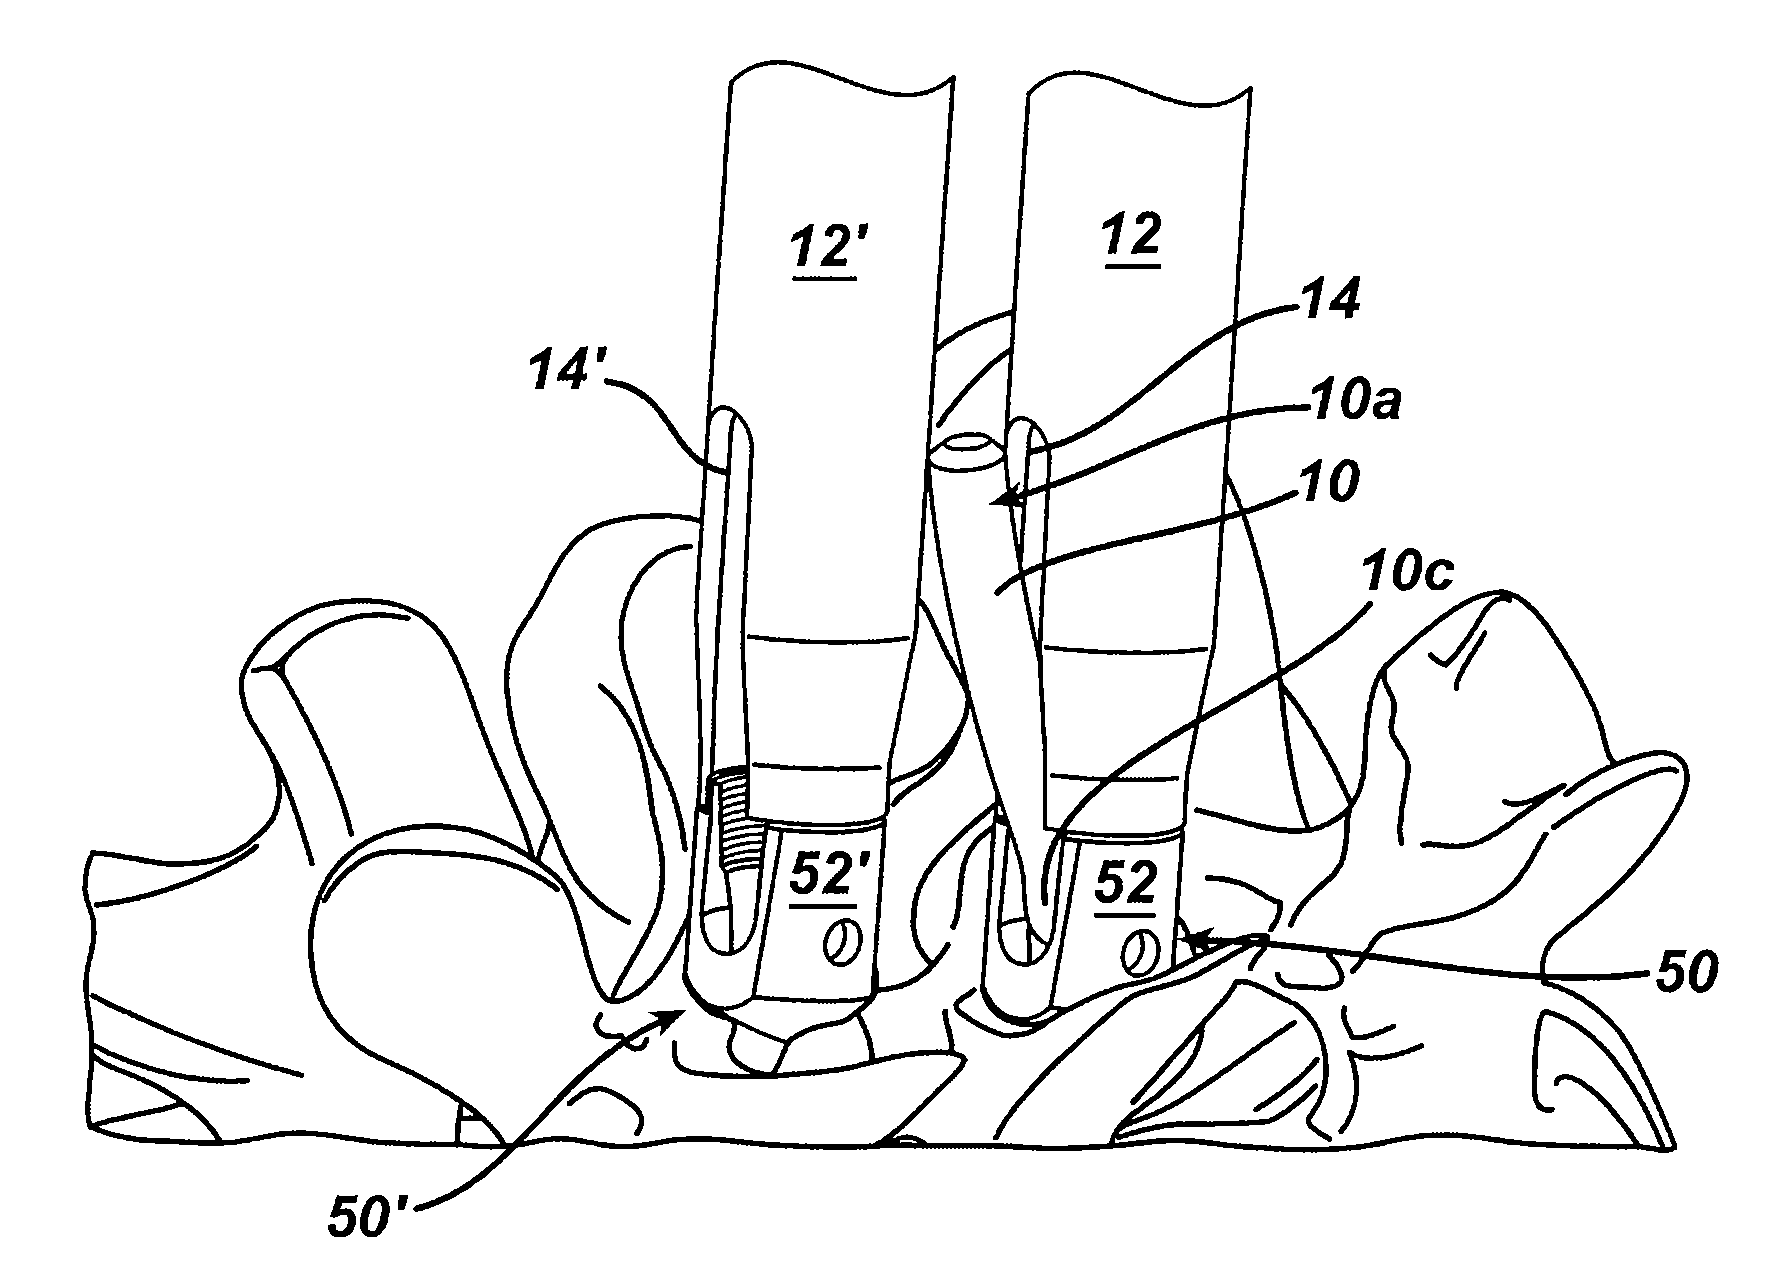 Spinal fixation element and methods